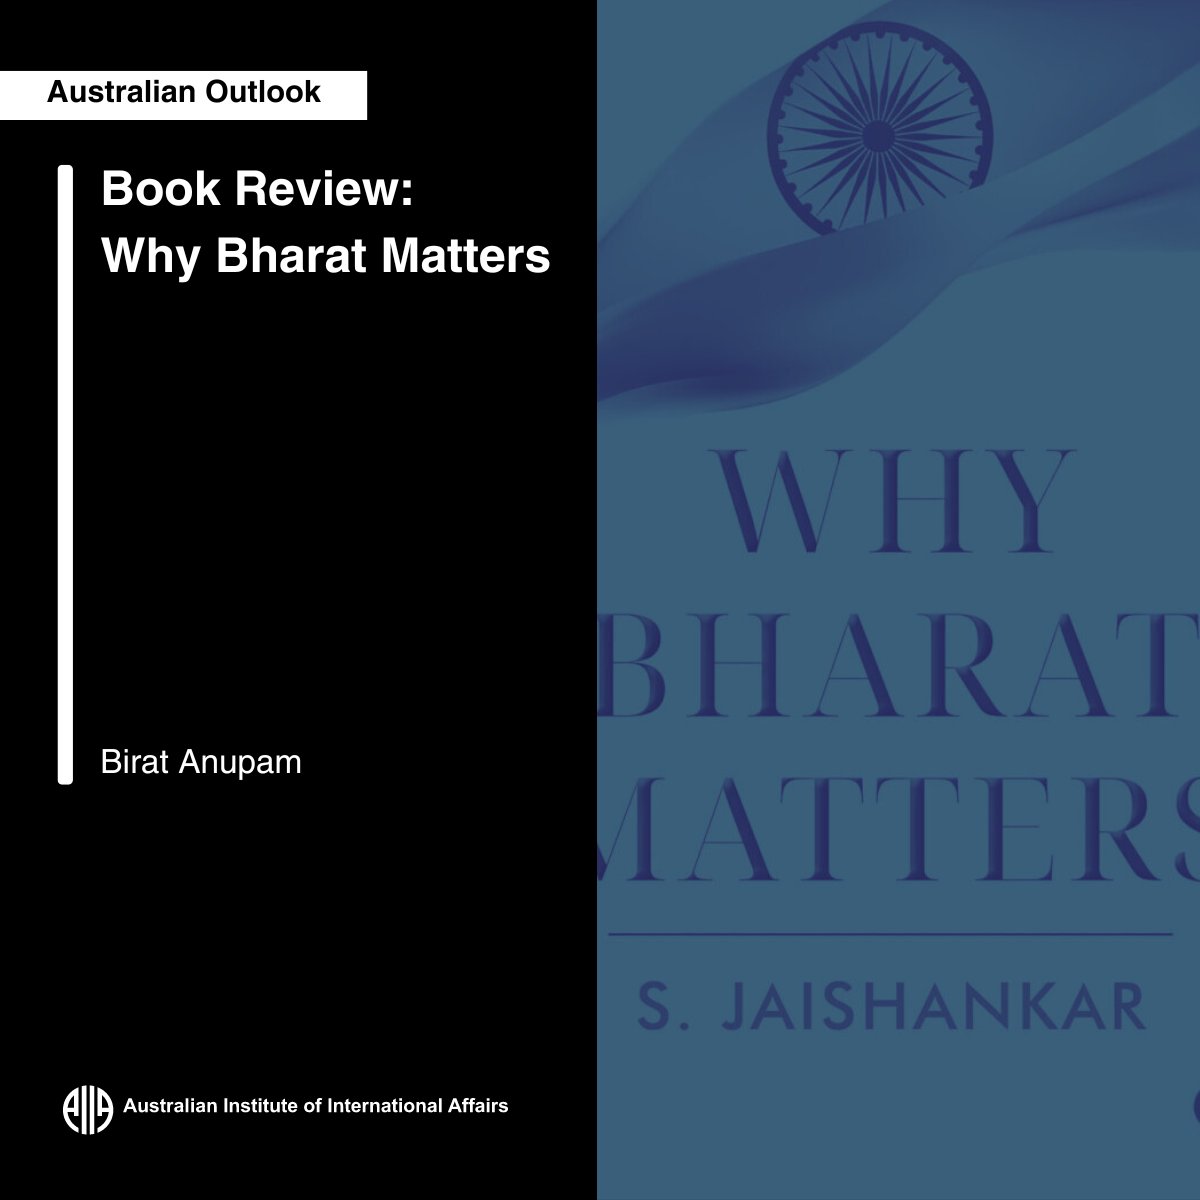 “Indian foreign minister Subrahmanyam Jaishankar’s latest book, Why Bharat Matters, offers a deep look at the civilisational turn in India’s trajectory,” reviewd by Birat Anupam Read more at Australian Outlook👇 ow.ly/Go4i50RkMxx